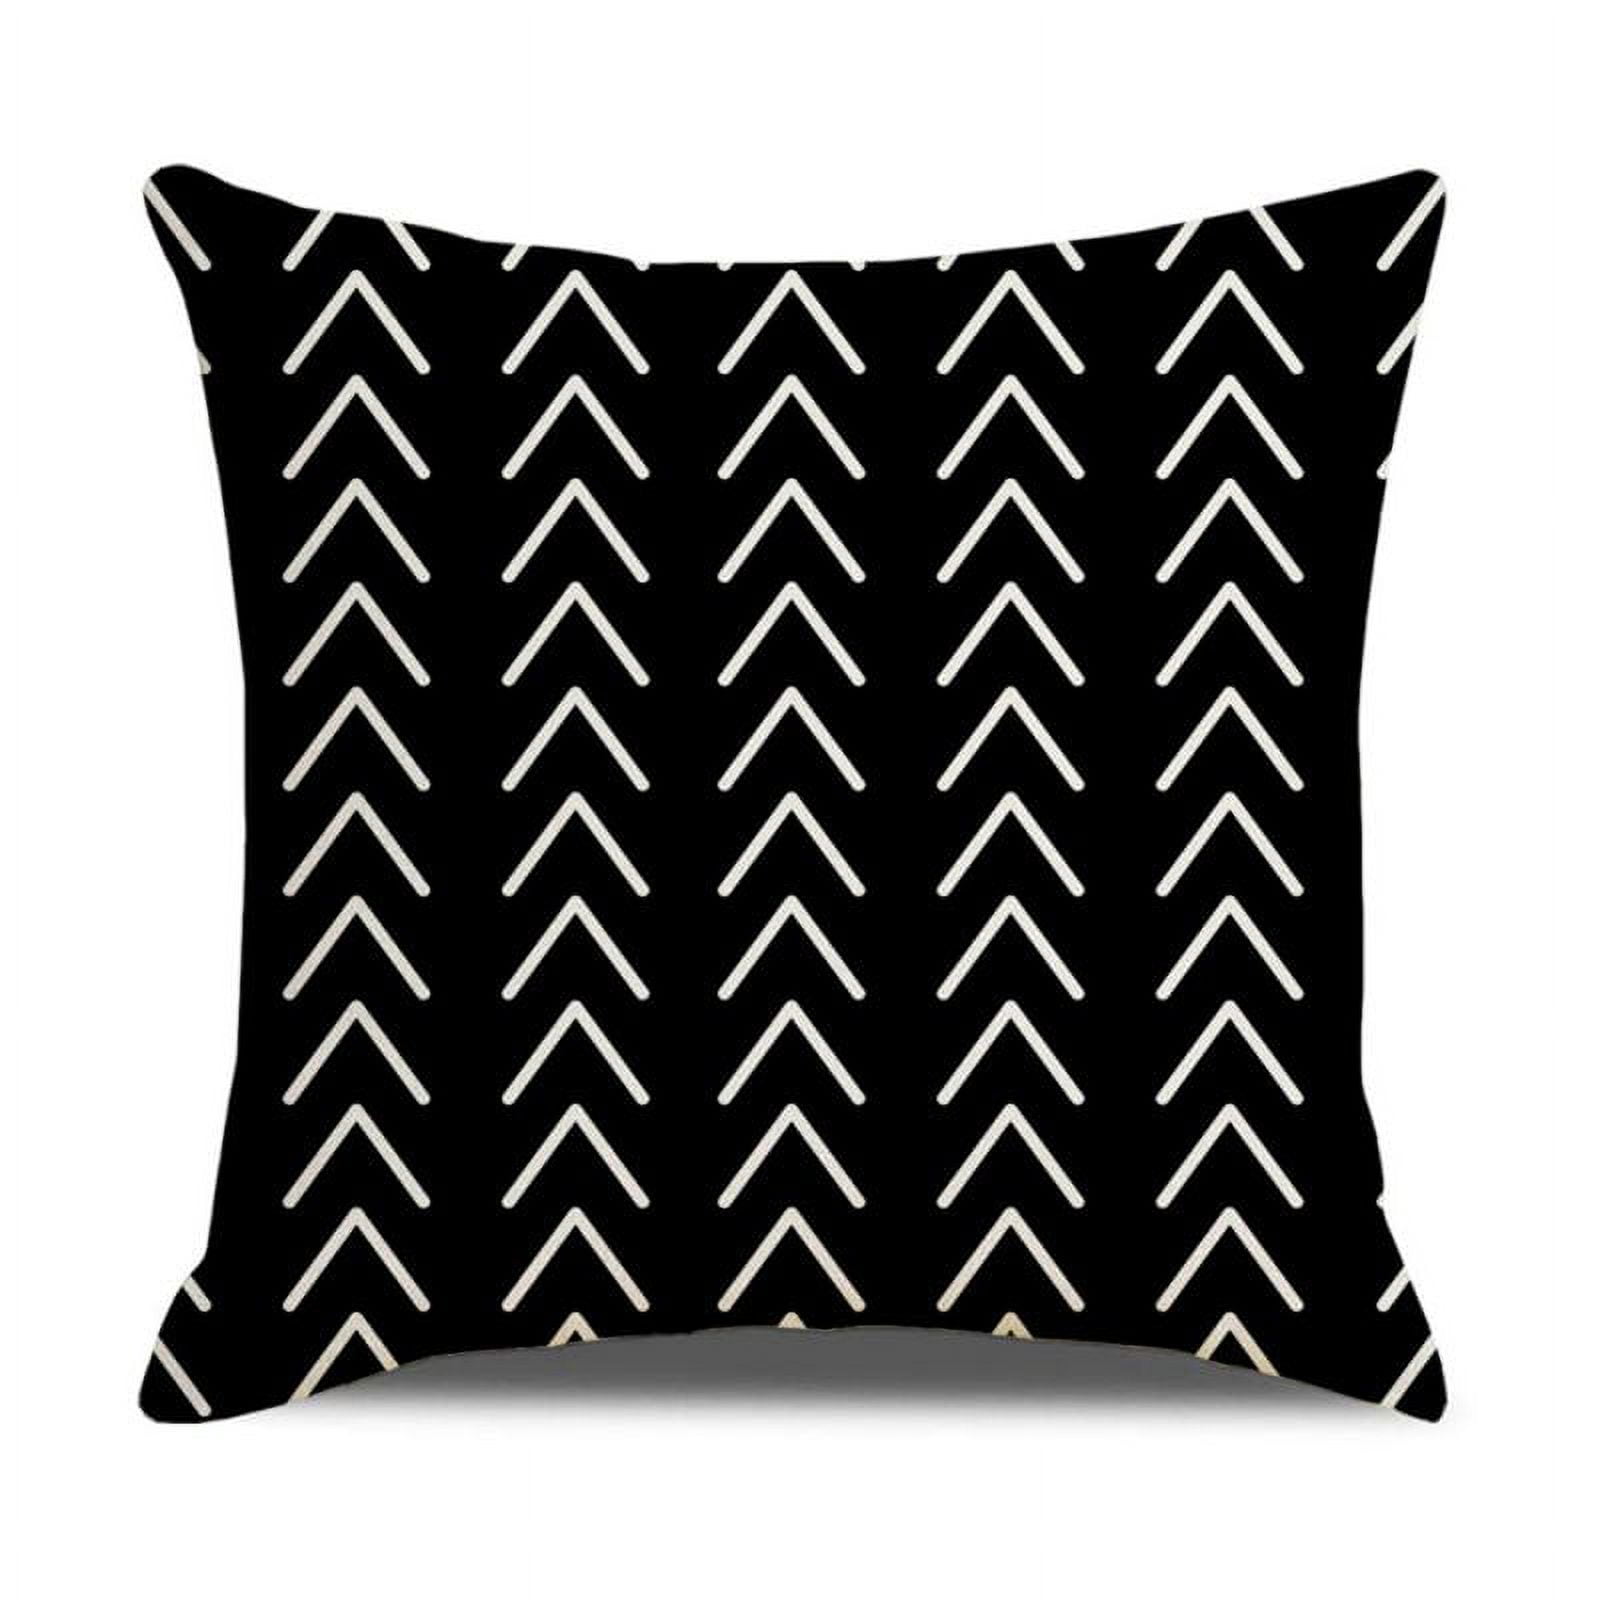 Whim-Wham Set of 4 Black and White Throw Pillows for Couch 18x18 inches  Grey Silver Boho Decorative Pillow Covers Abstract Art Geometric Modern